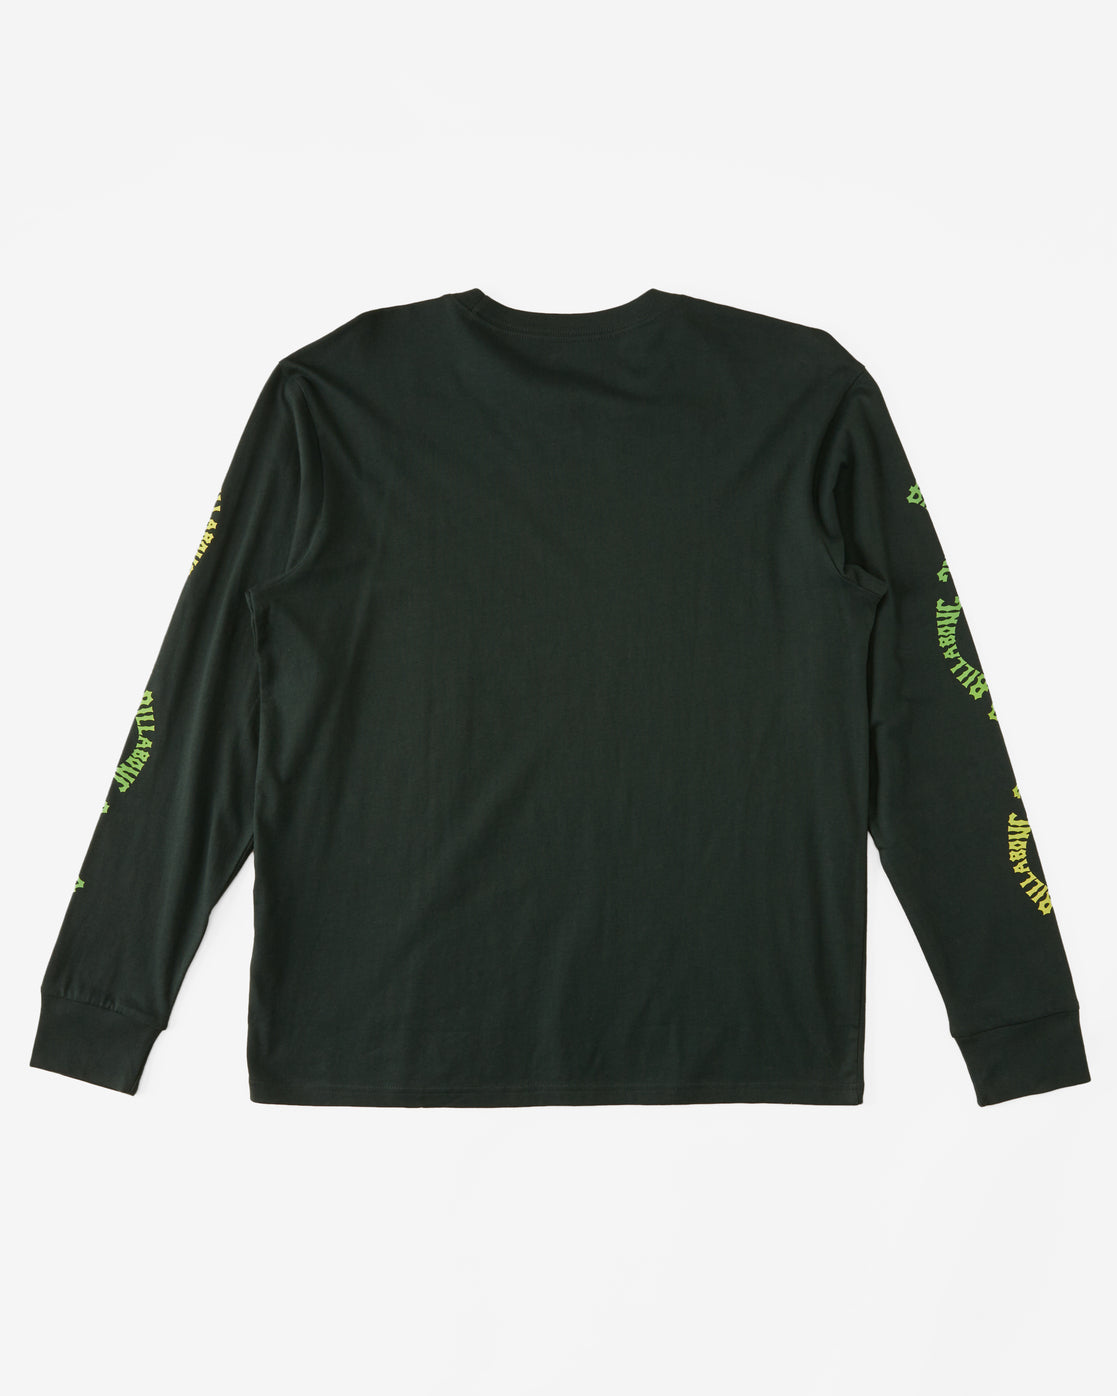 Snaking Arches Long Sleeve T-Shirt - Dark Forest